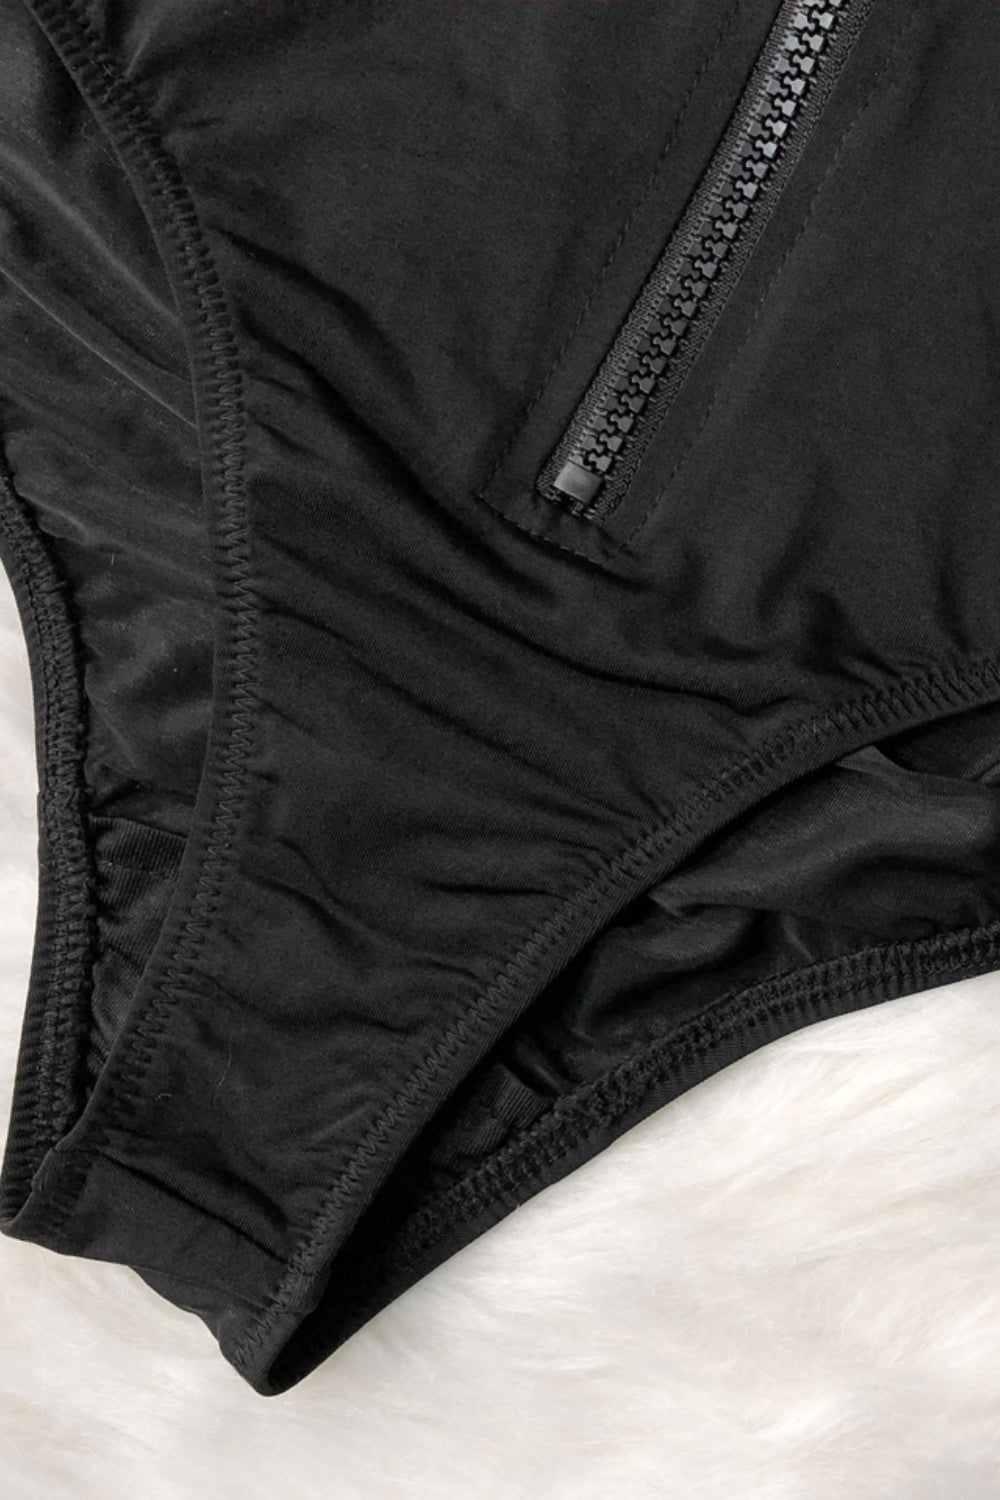 a close up of a black underwear on a white surface